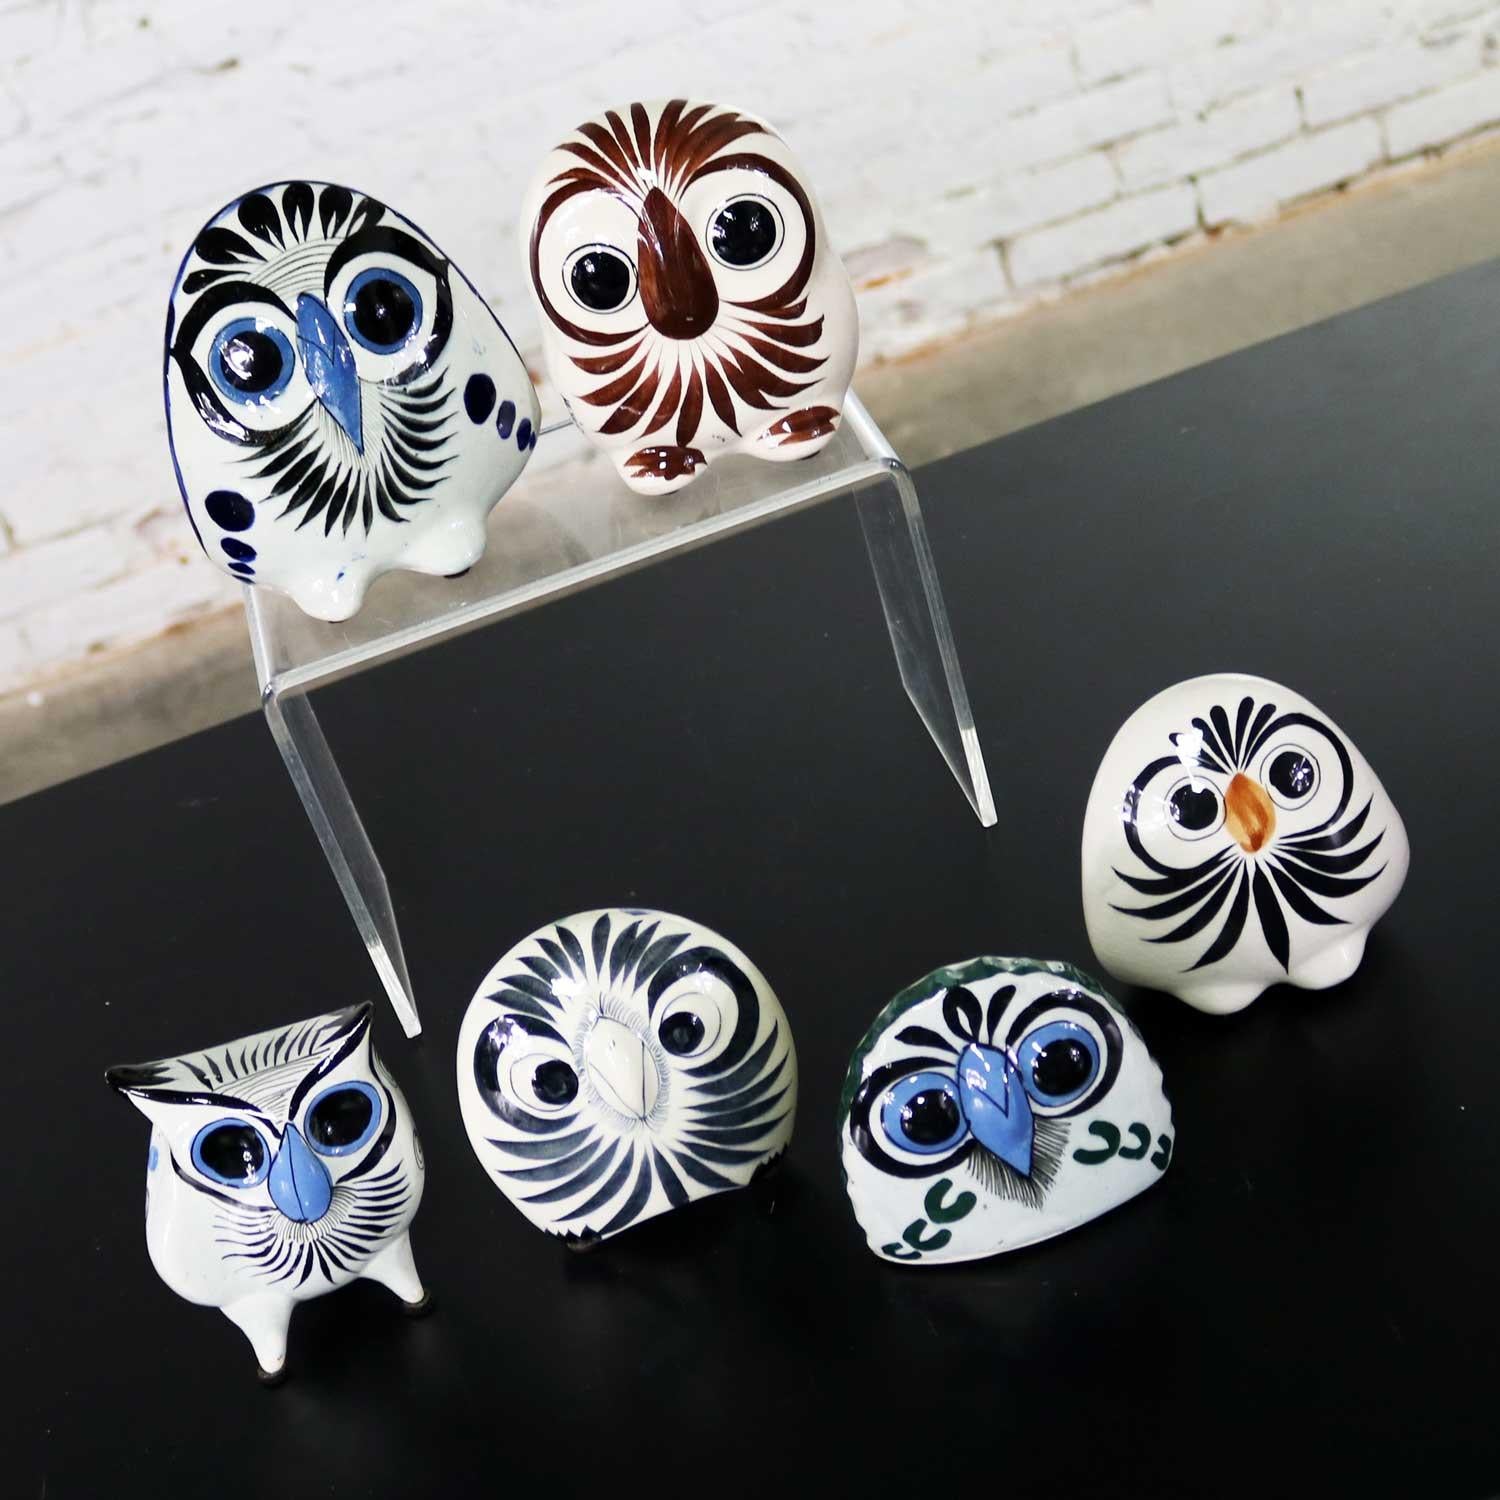 Folk Art Vintage Tonala Pottery Owls Hand Painted and Made in Mexico Collection of Six